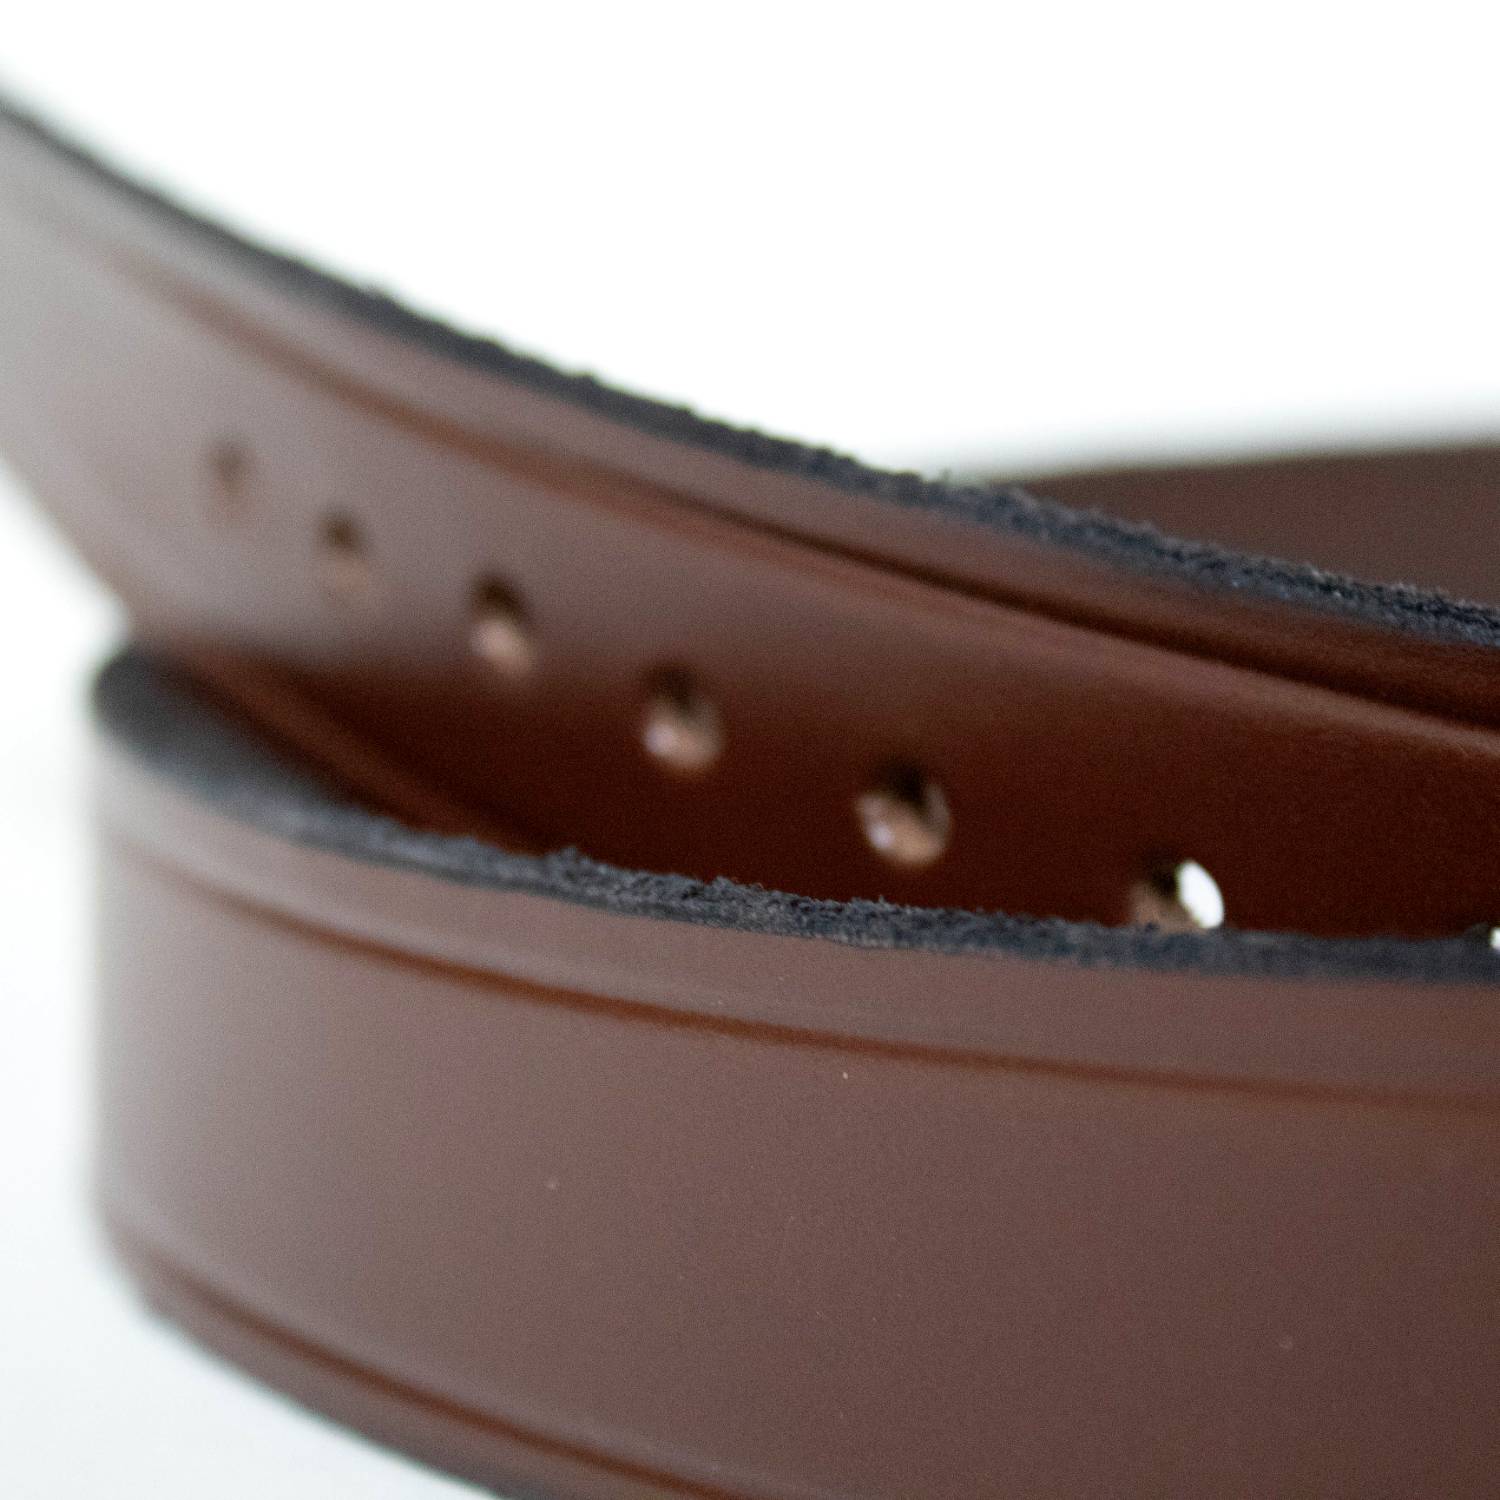 Amish-Made Dressy Leather Belts - 1 inch wide, Clothing and Accessories -  Lehman's